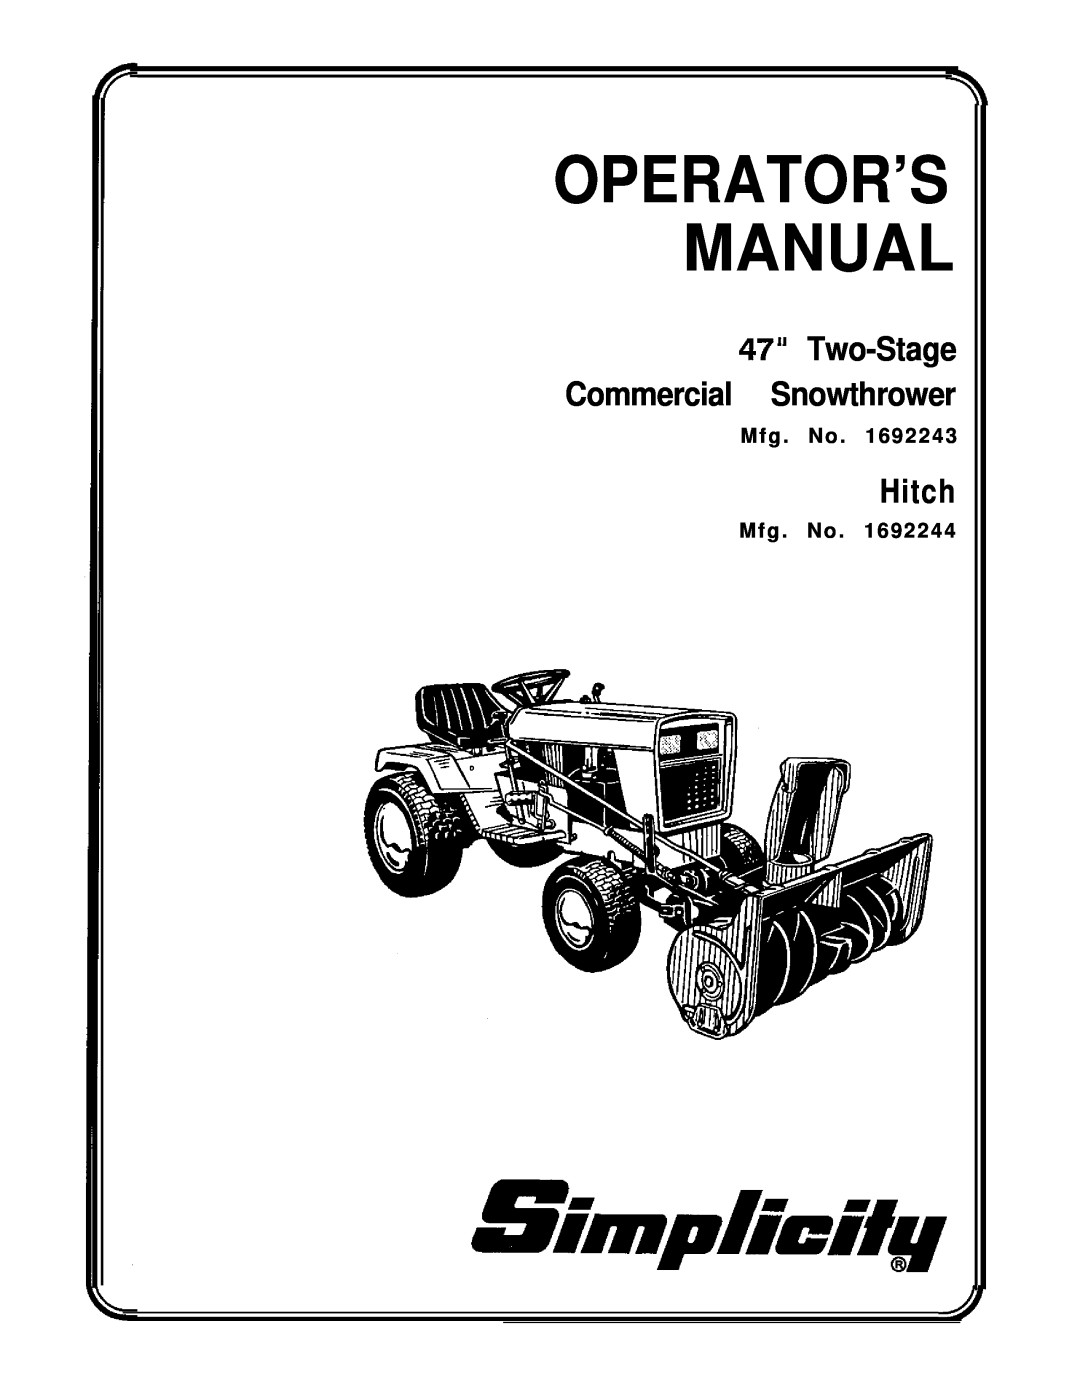 Simplicity 1692243, 1692244 manual 47” Two-Stage Commercial Snowthrower, Hitch, Mfg . No, Operator’S Manual 